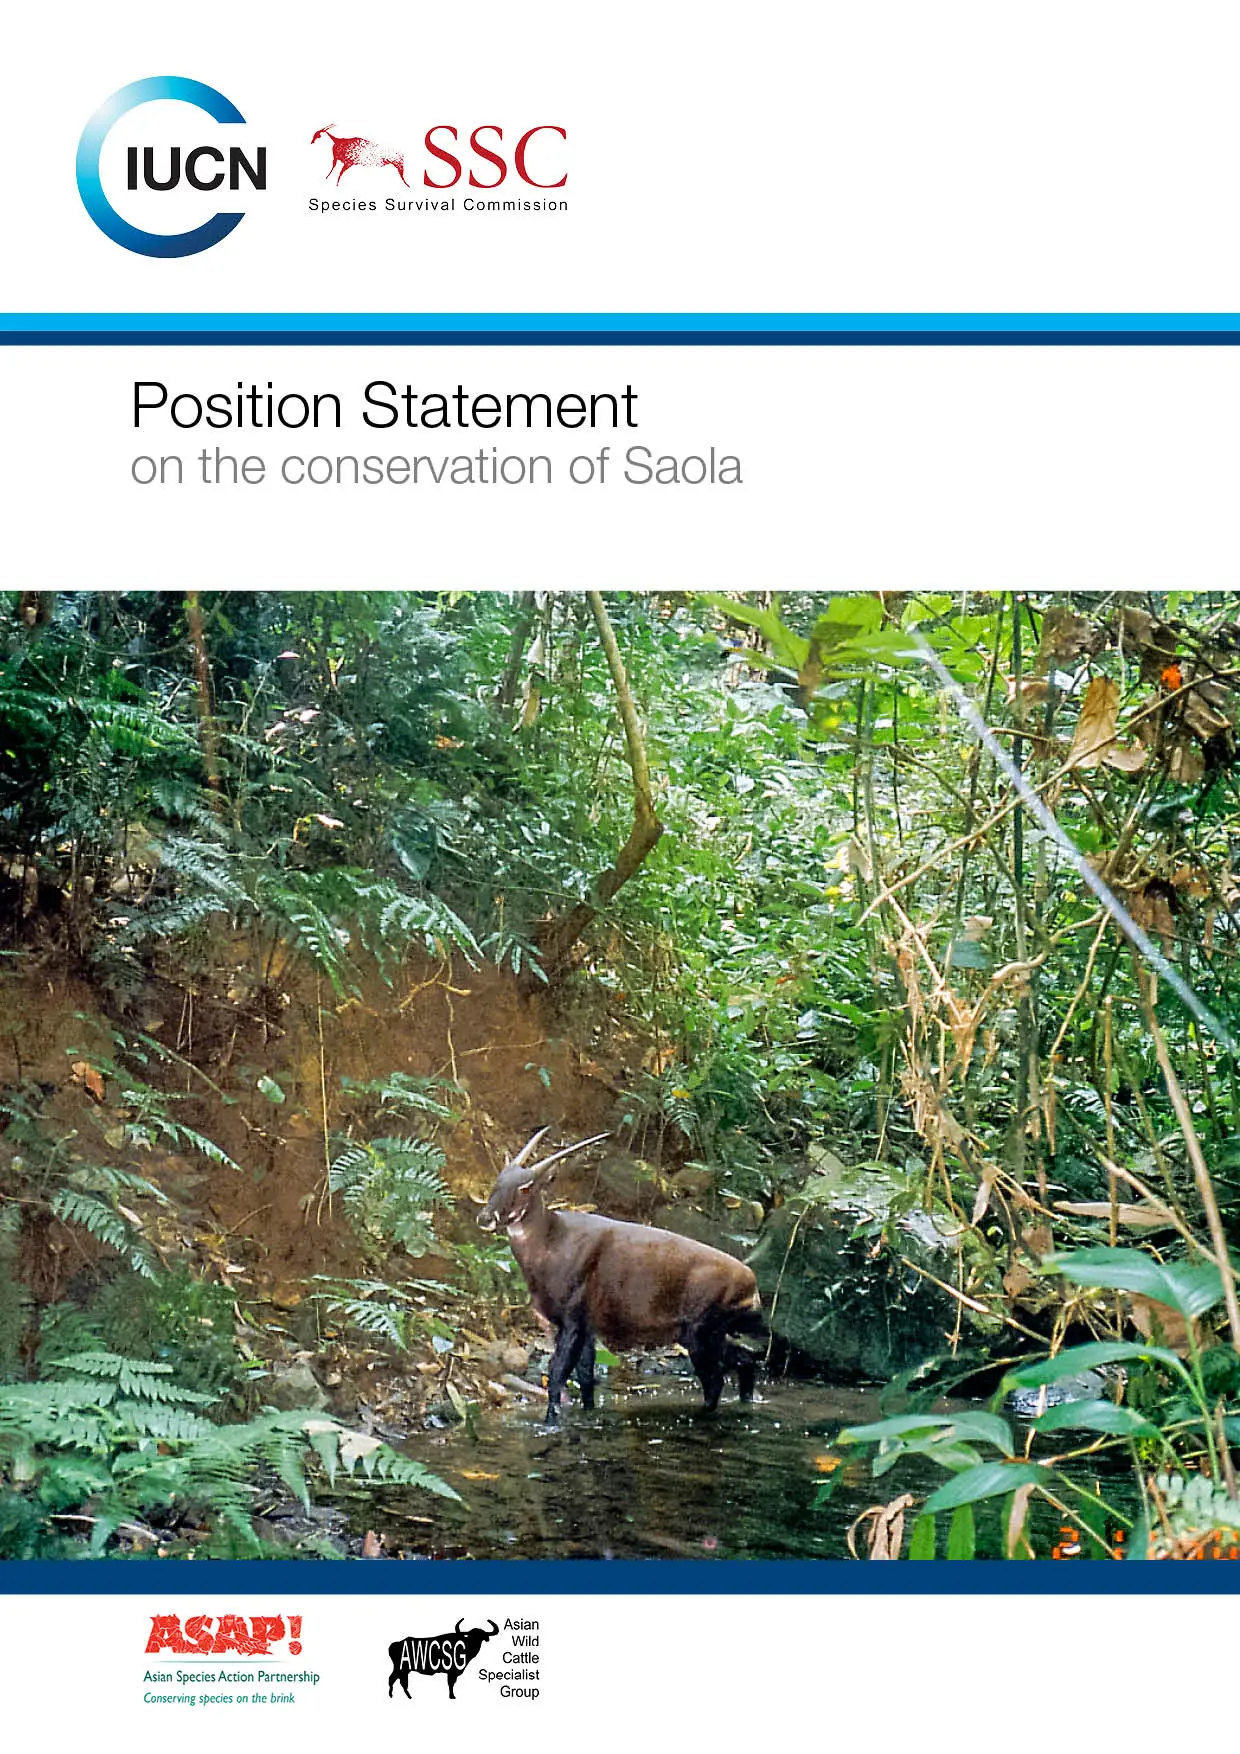 Position Statement on the Conservation of Saola